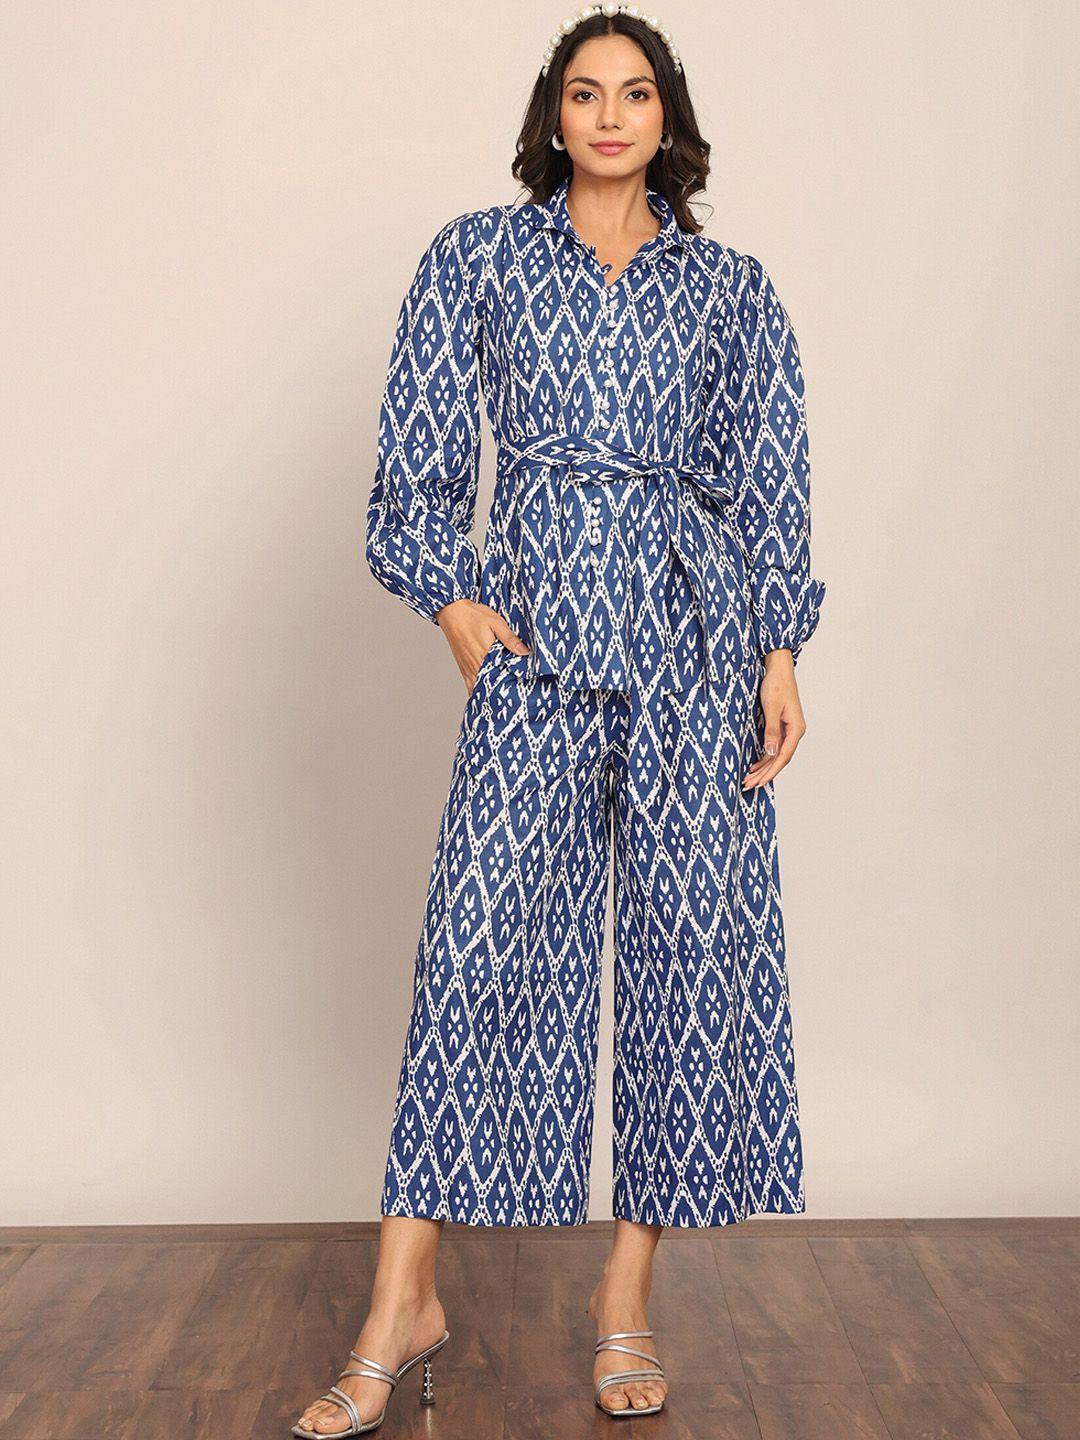 kaori by shreya agarwal pure cotton printed shirt with trousers co-ords